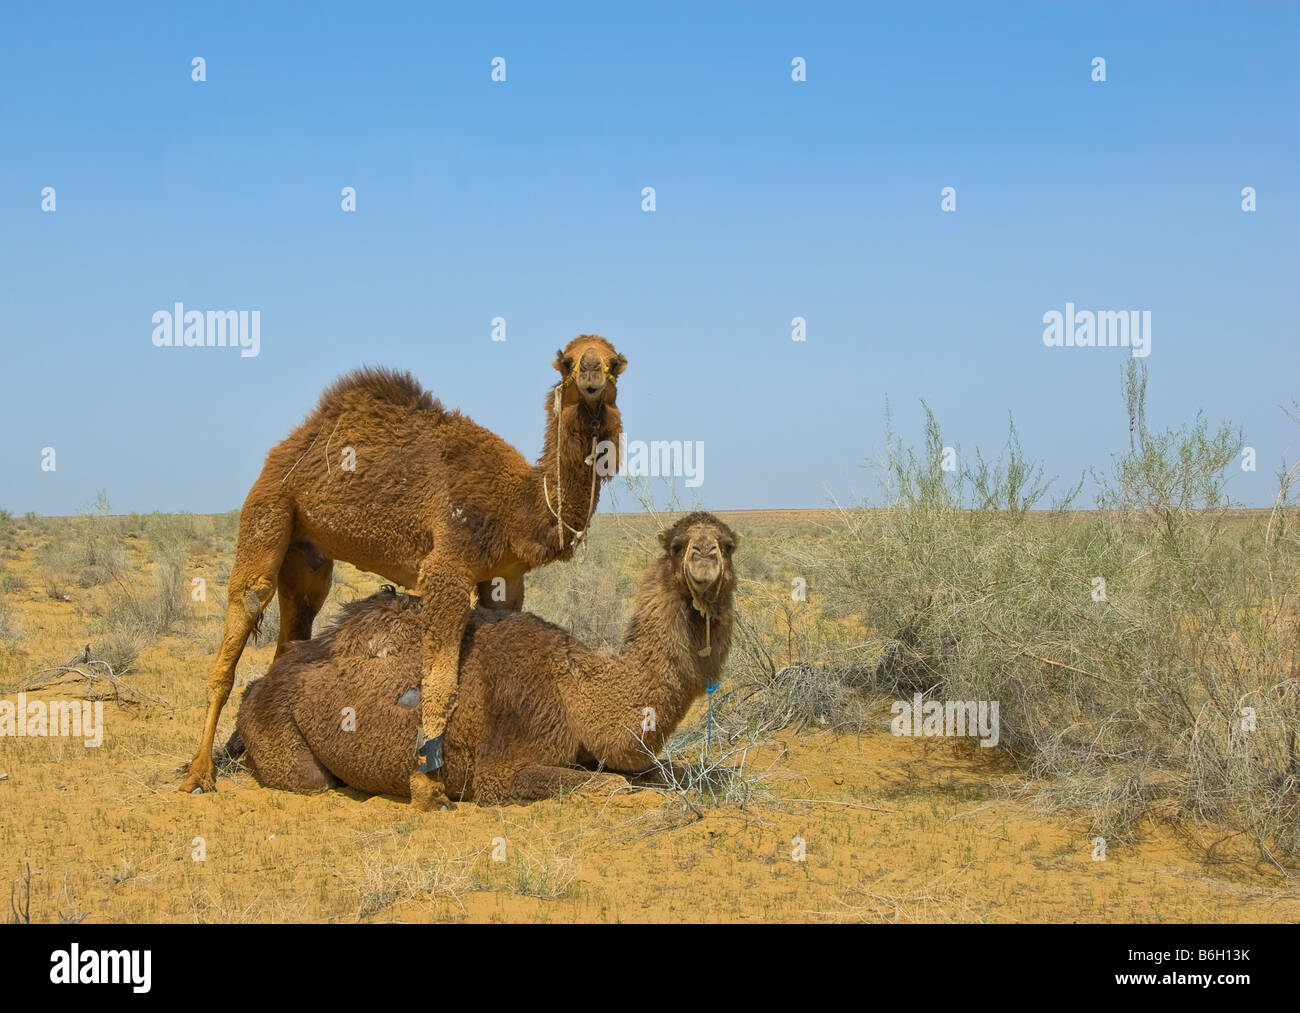 Two camels in the desert Stock Photo